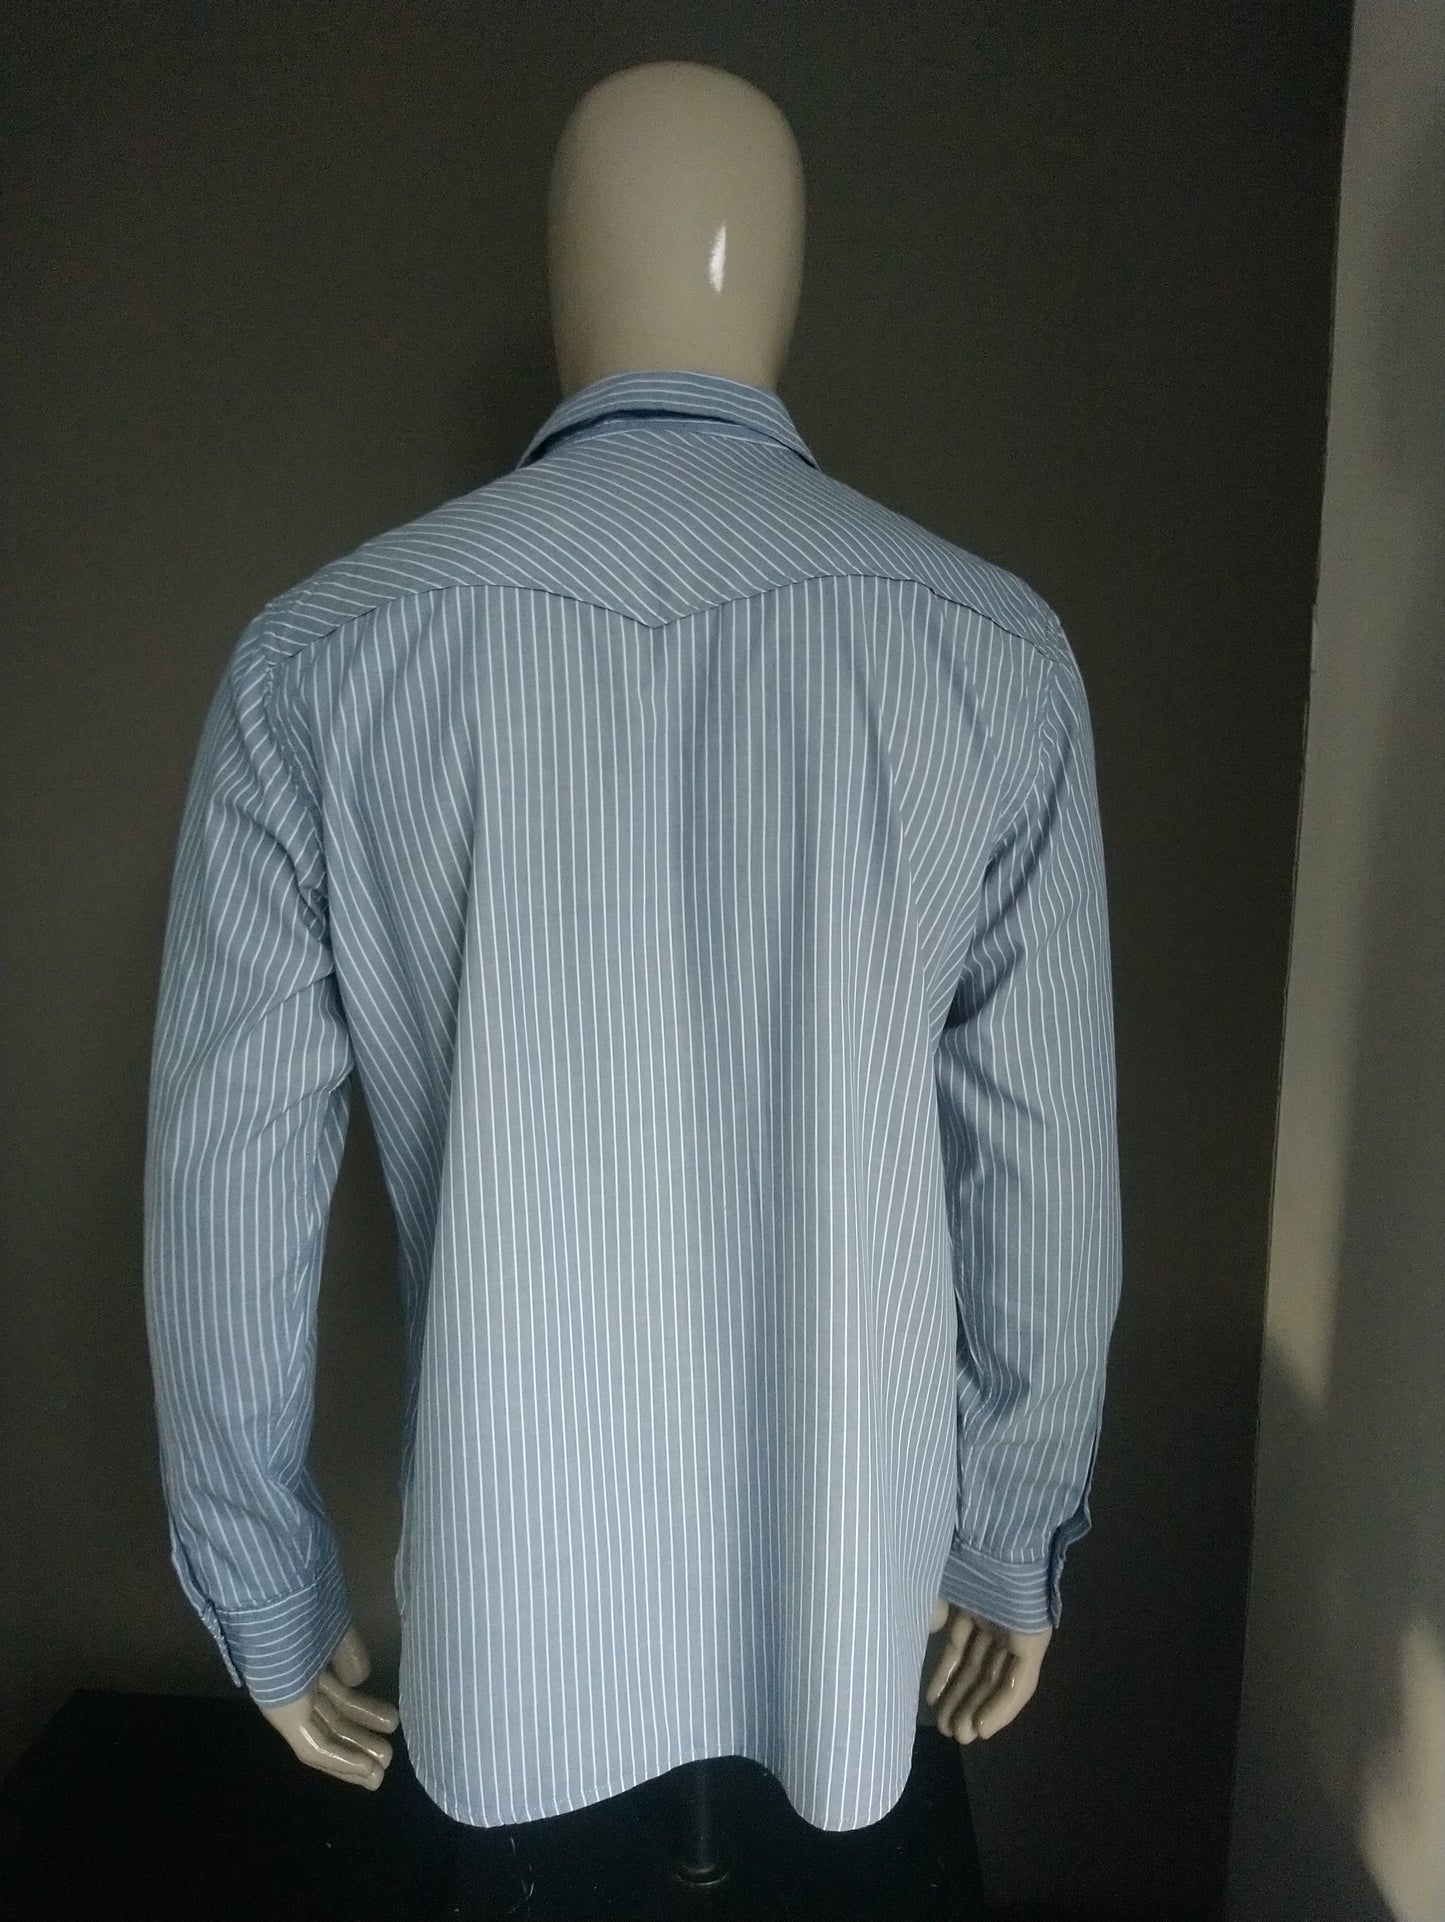 Old navy shirt with press studs. Gray white. Size XL